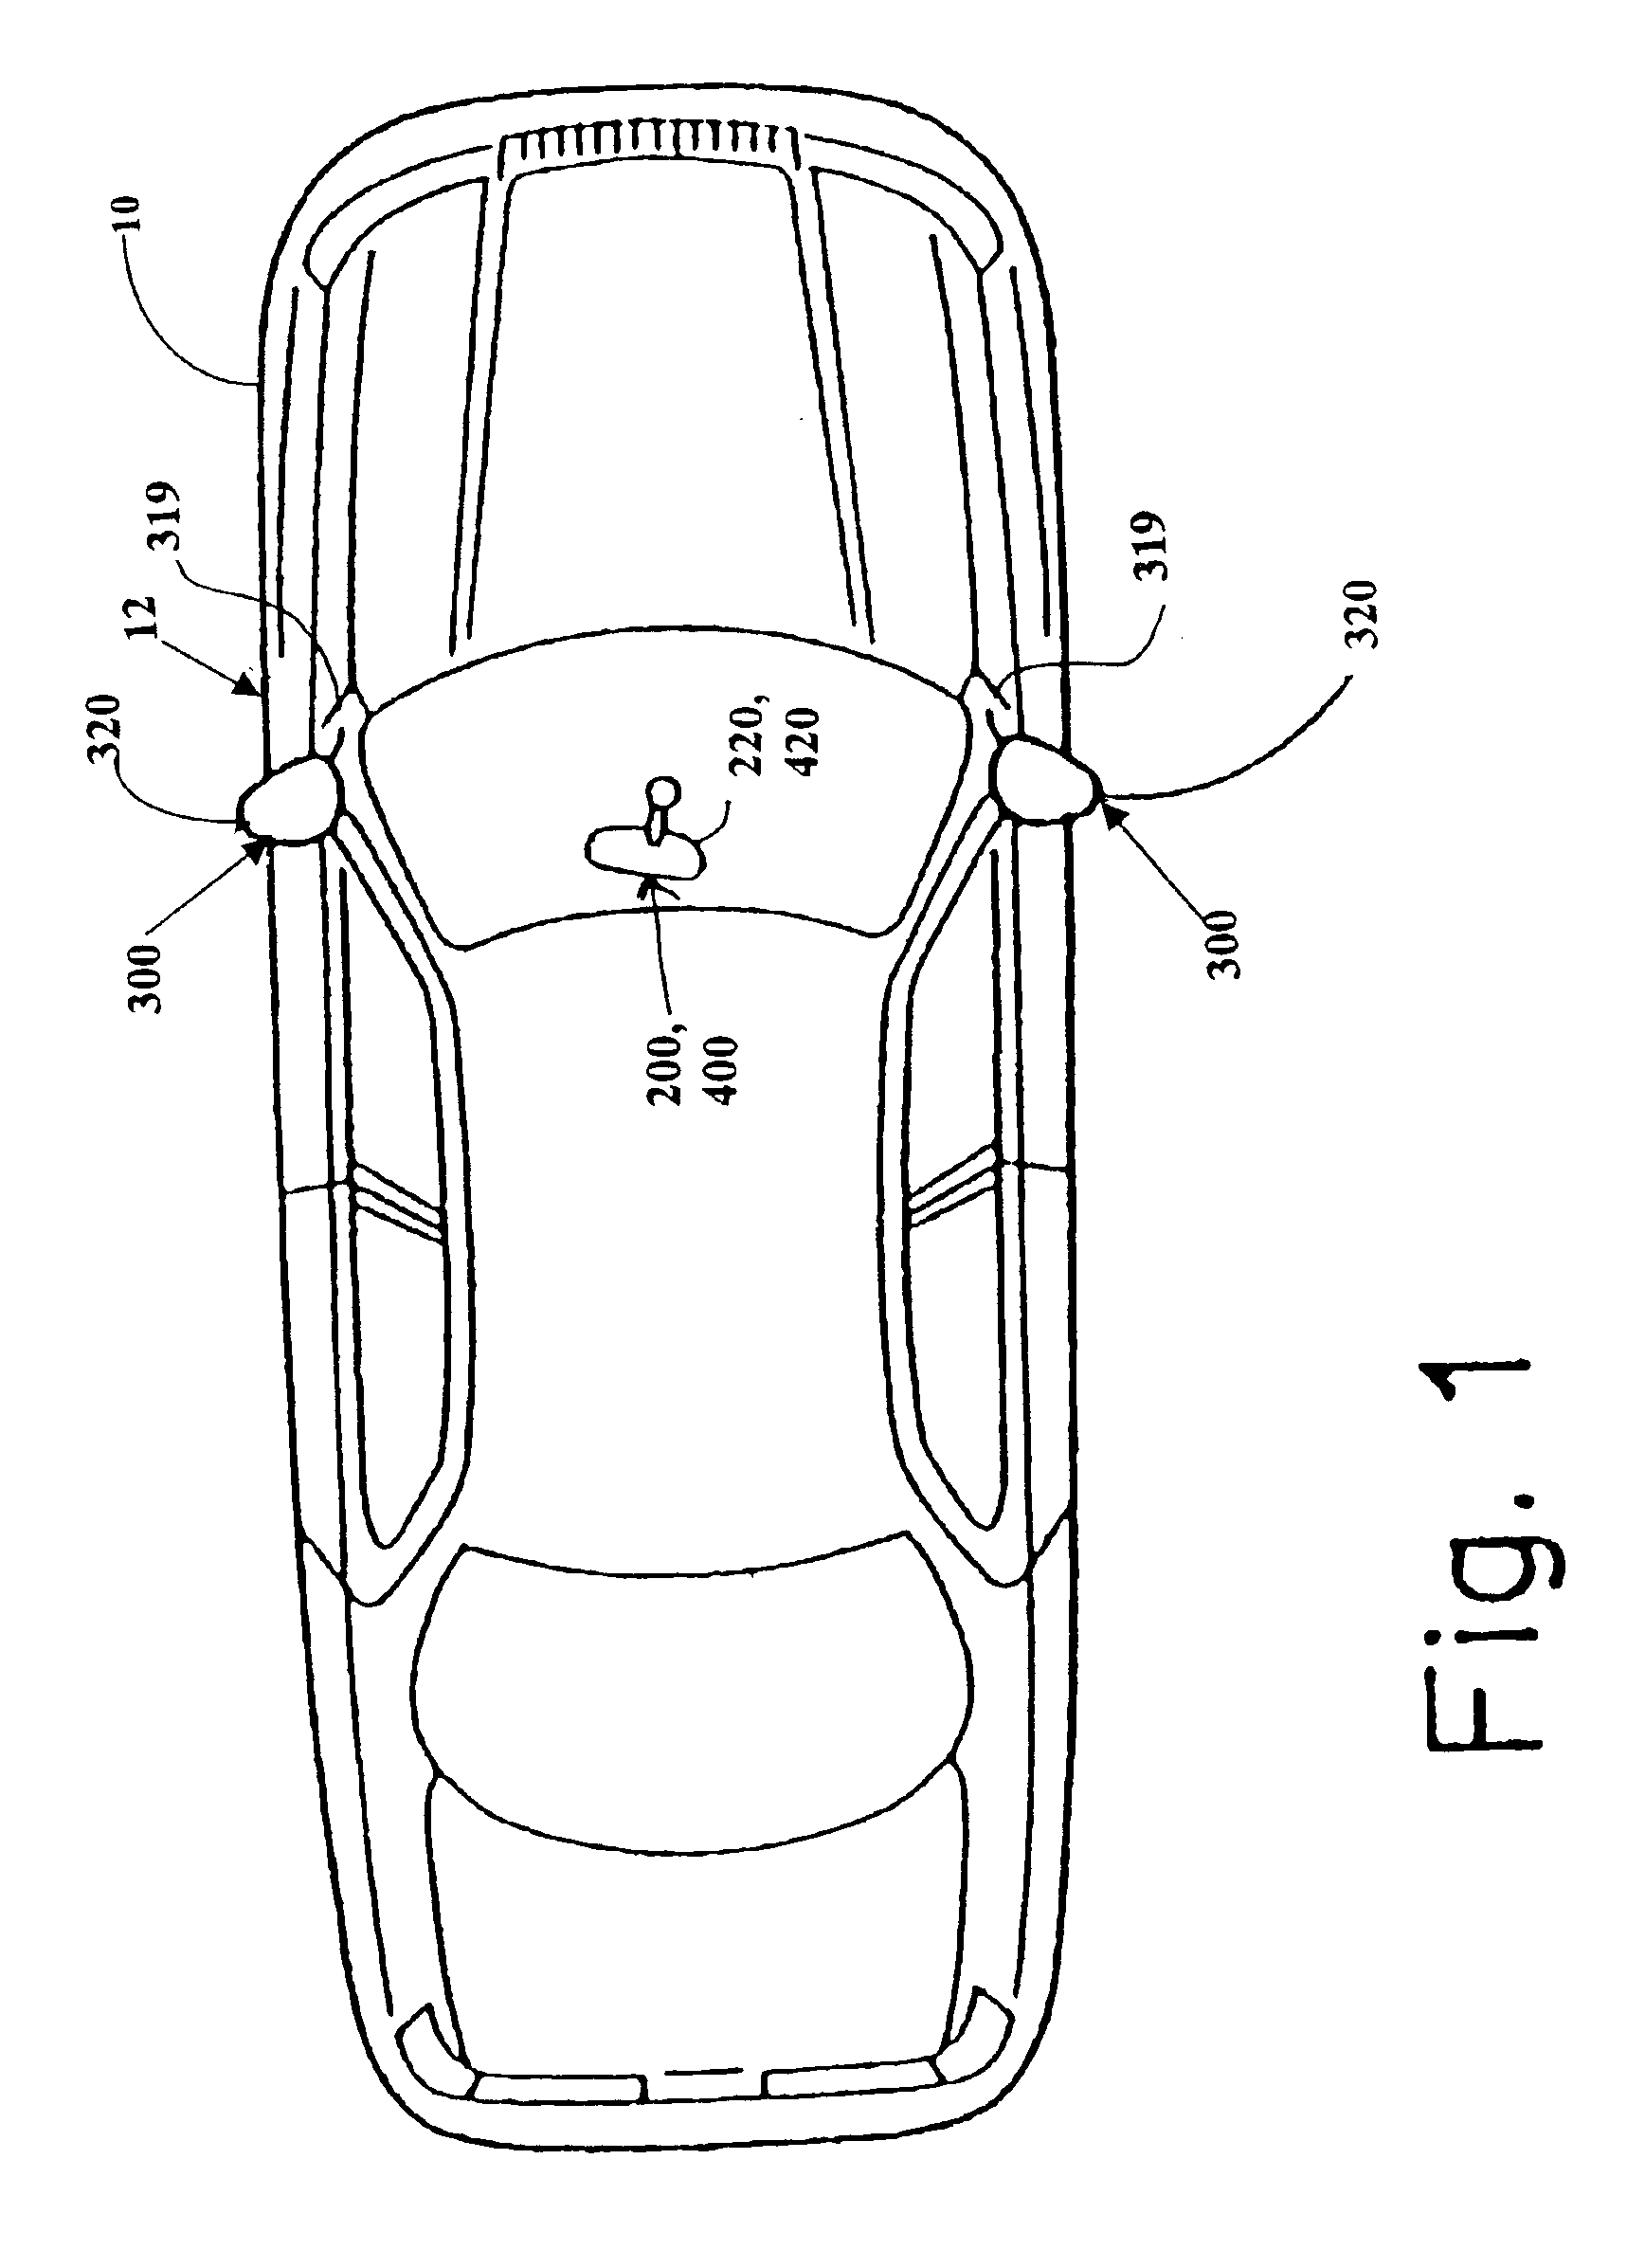 Vehicle mirror system with light conduiting member